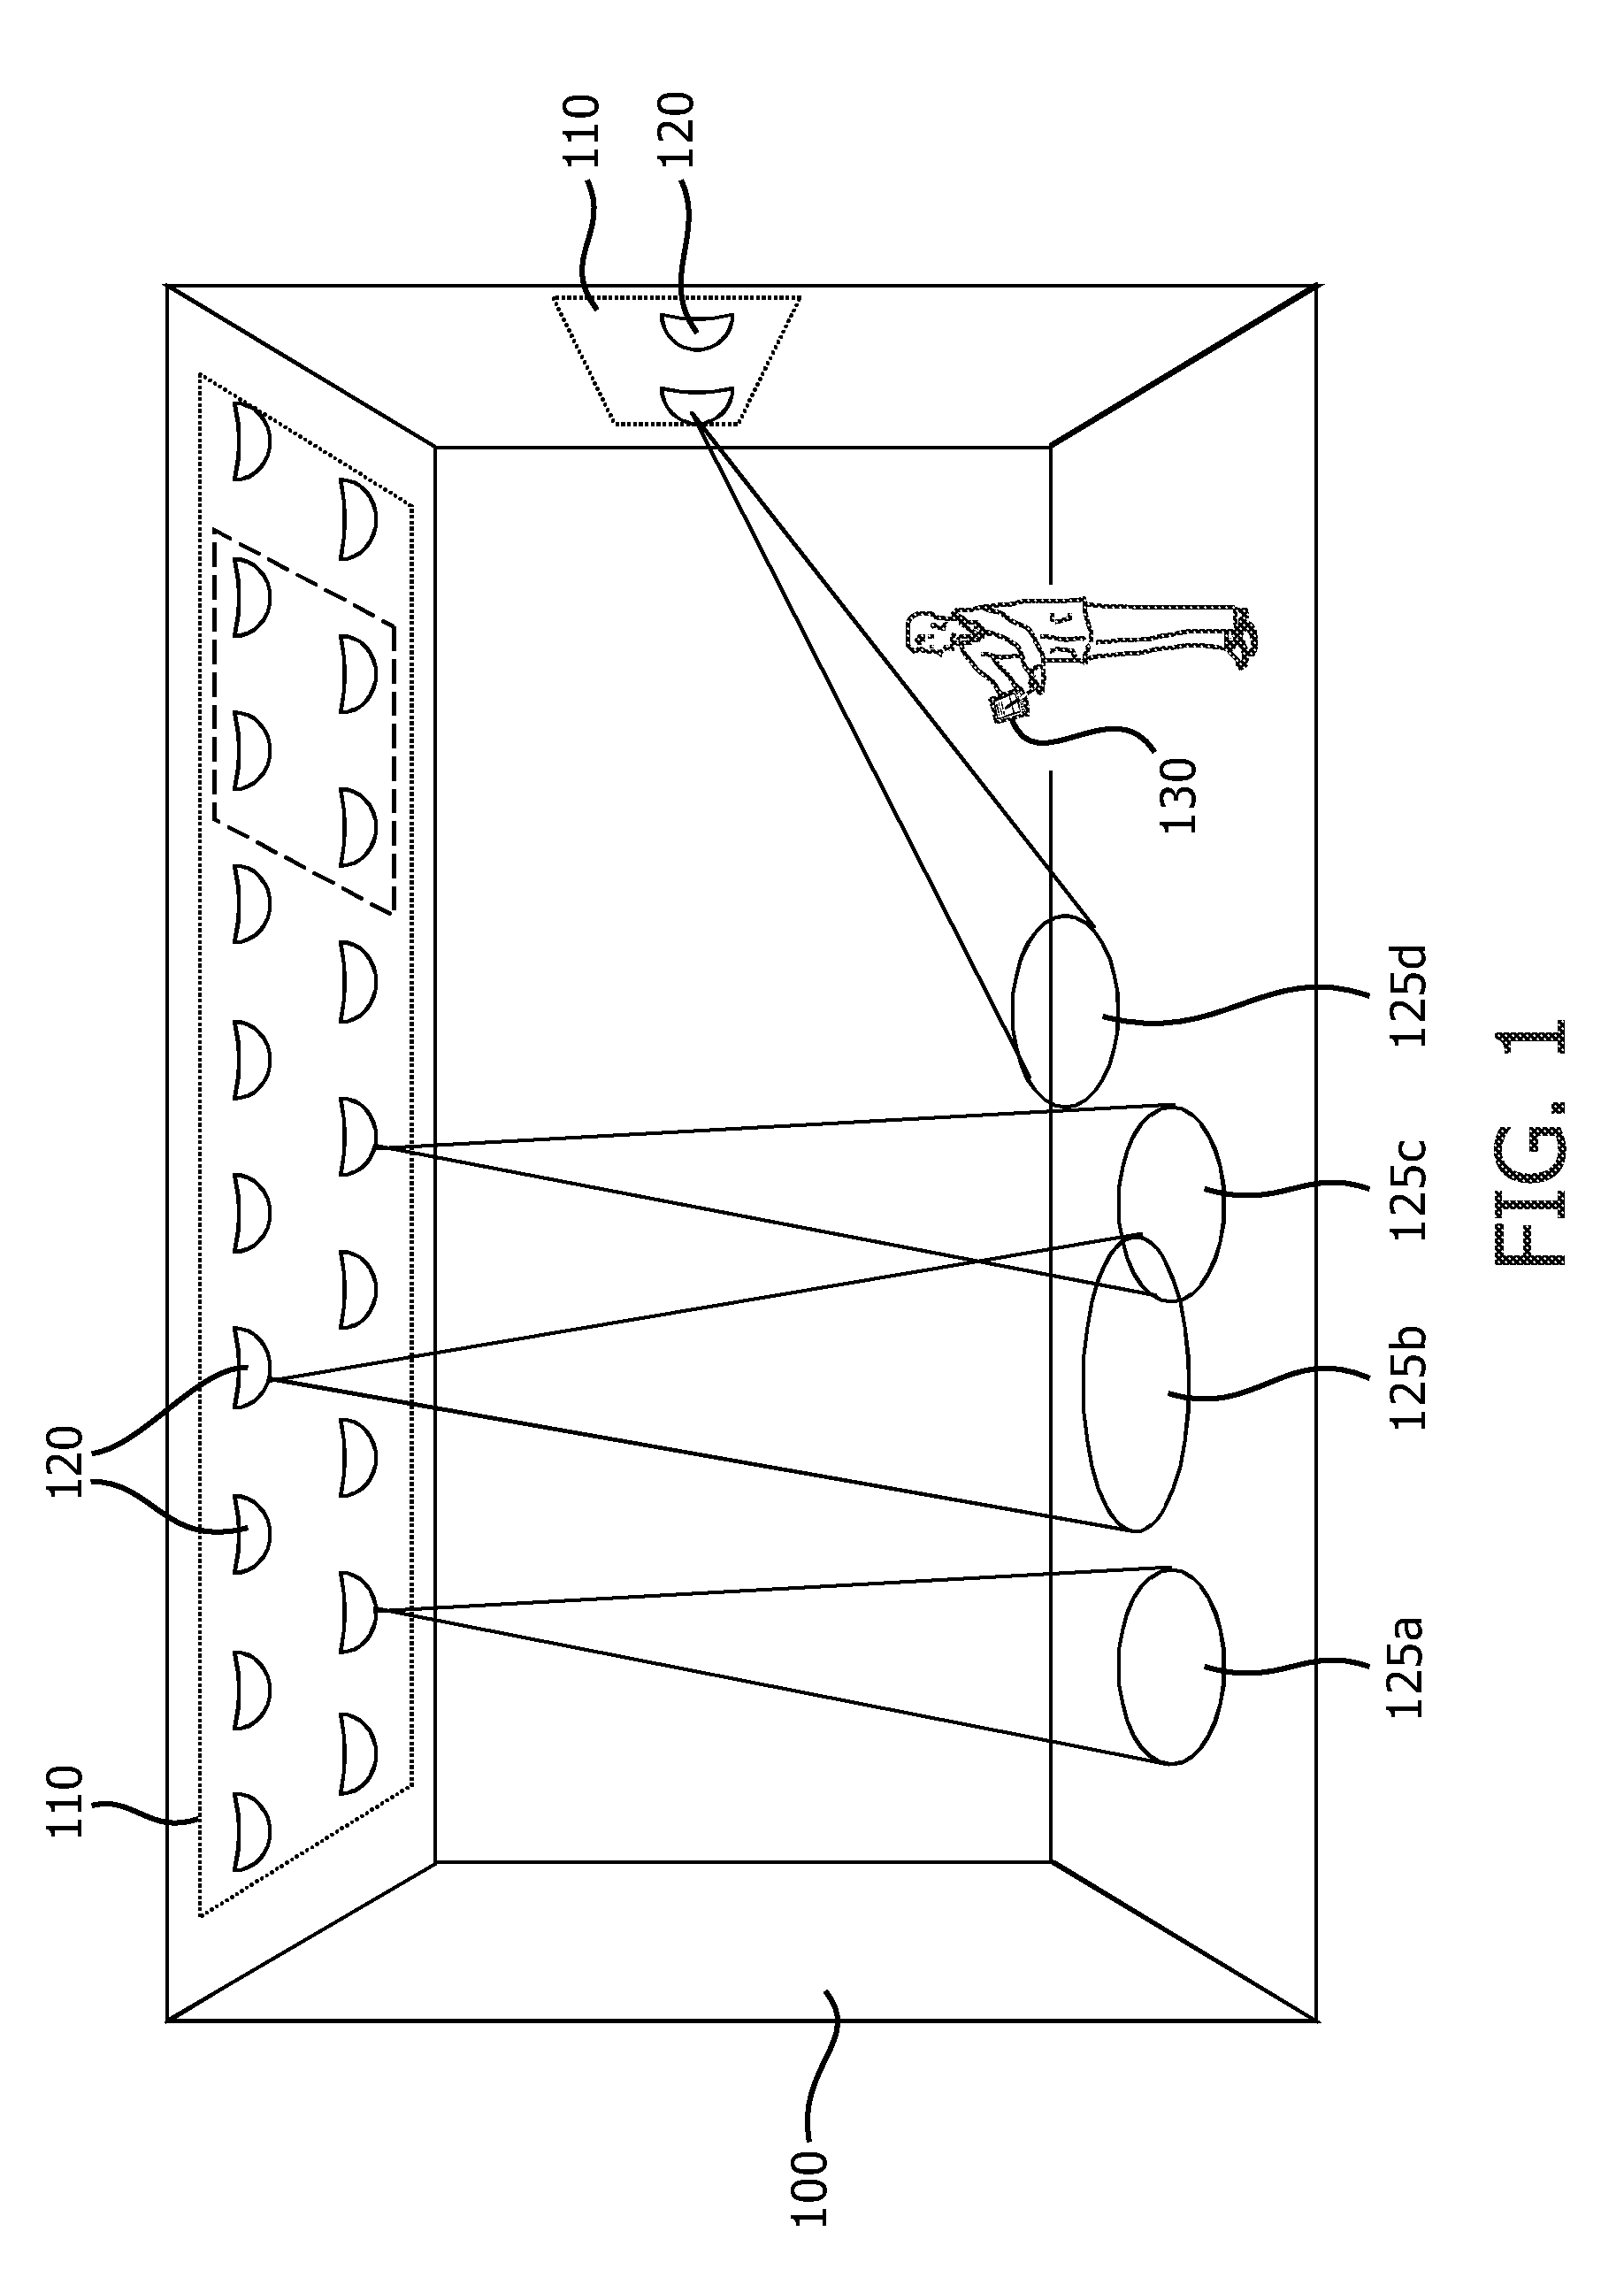 Method and System for 2D Detection of Localized Light Contributions